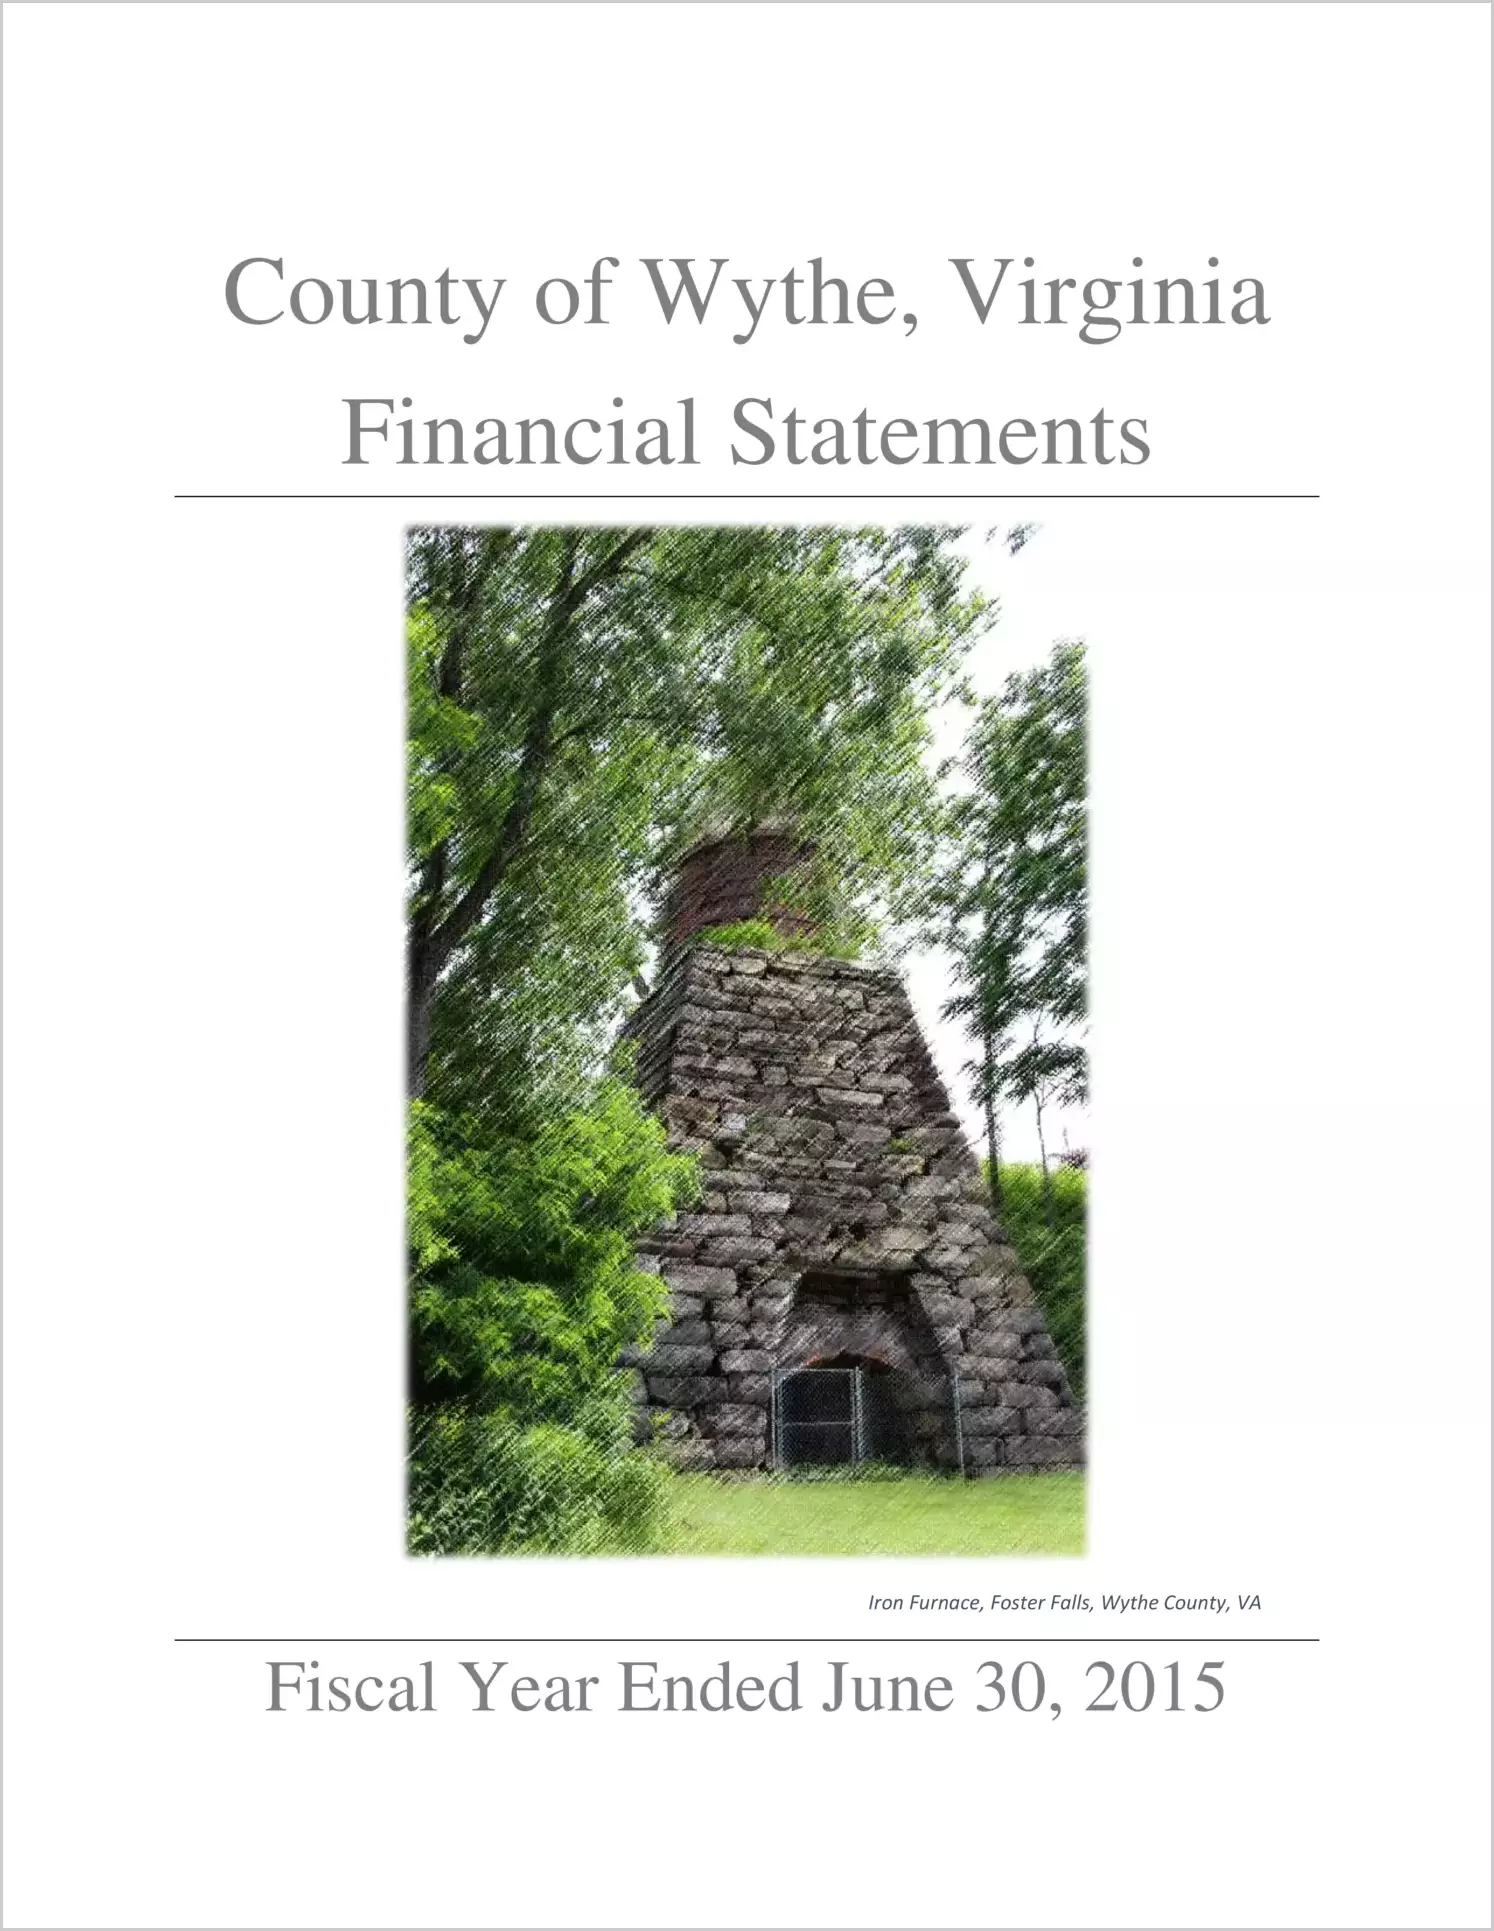 2015 Annual Financial Report for County of Wythe